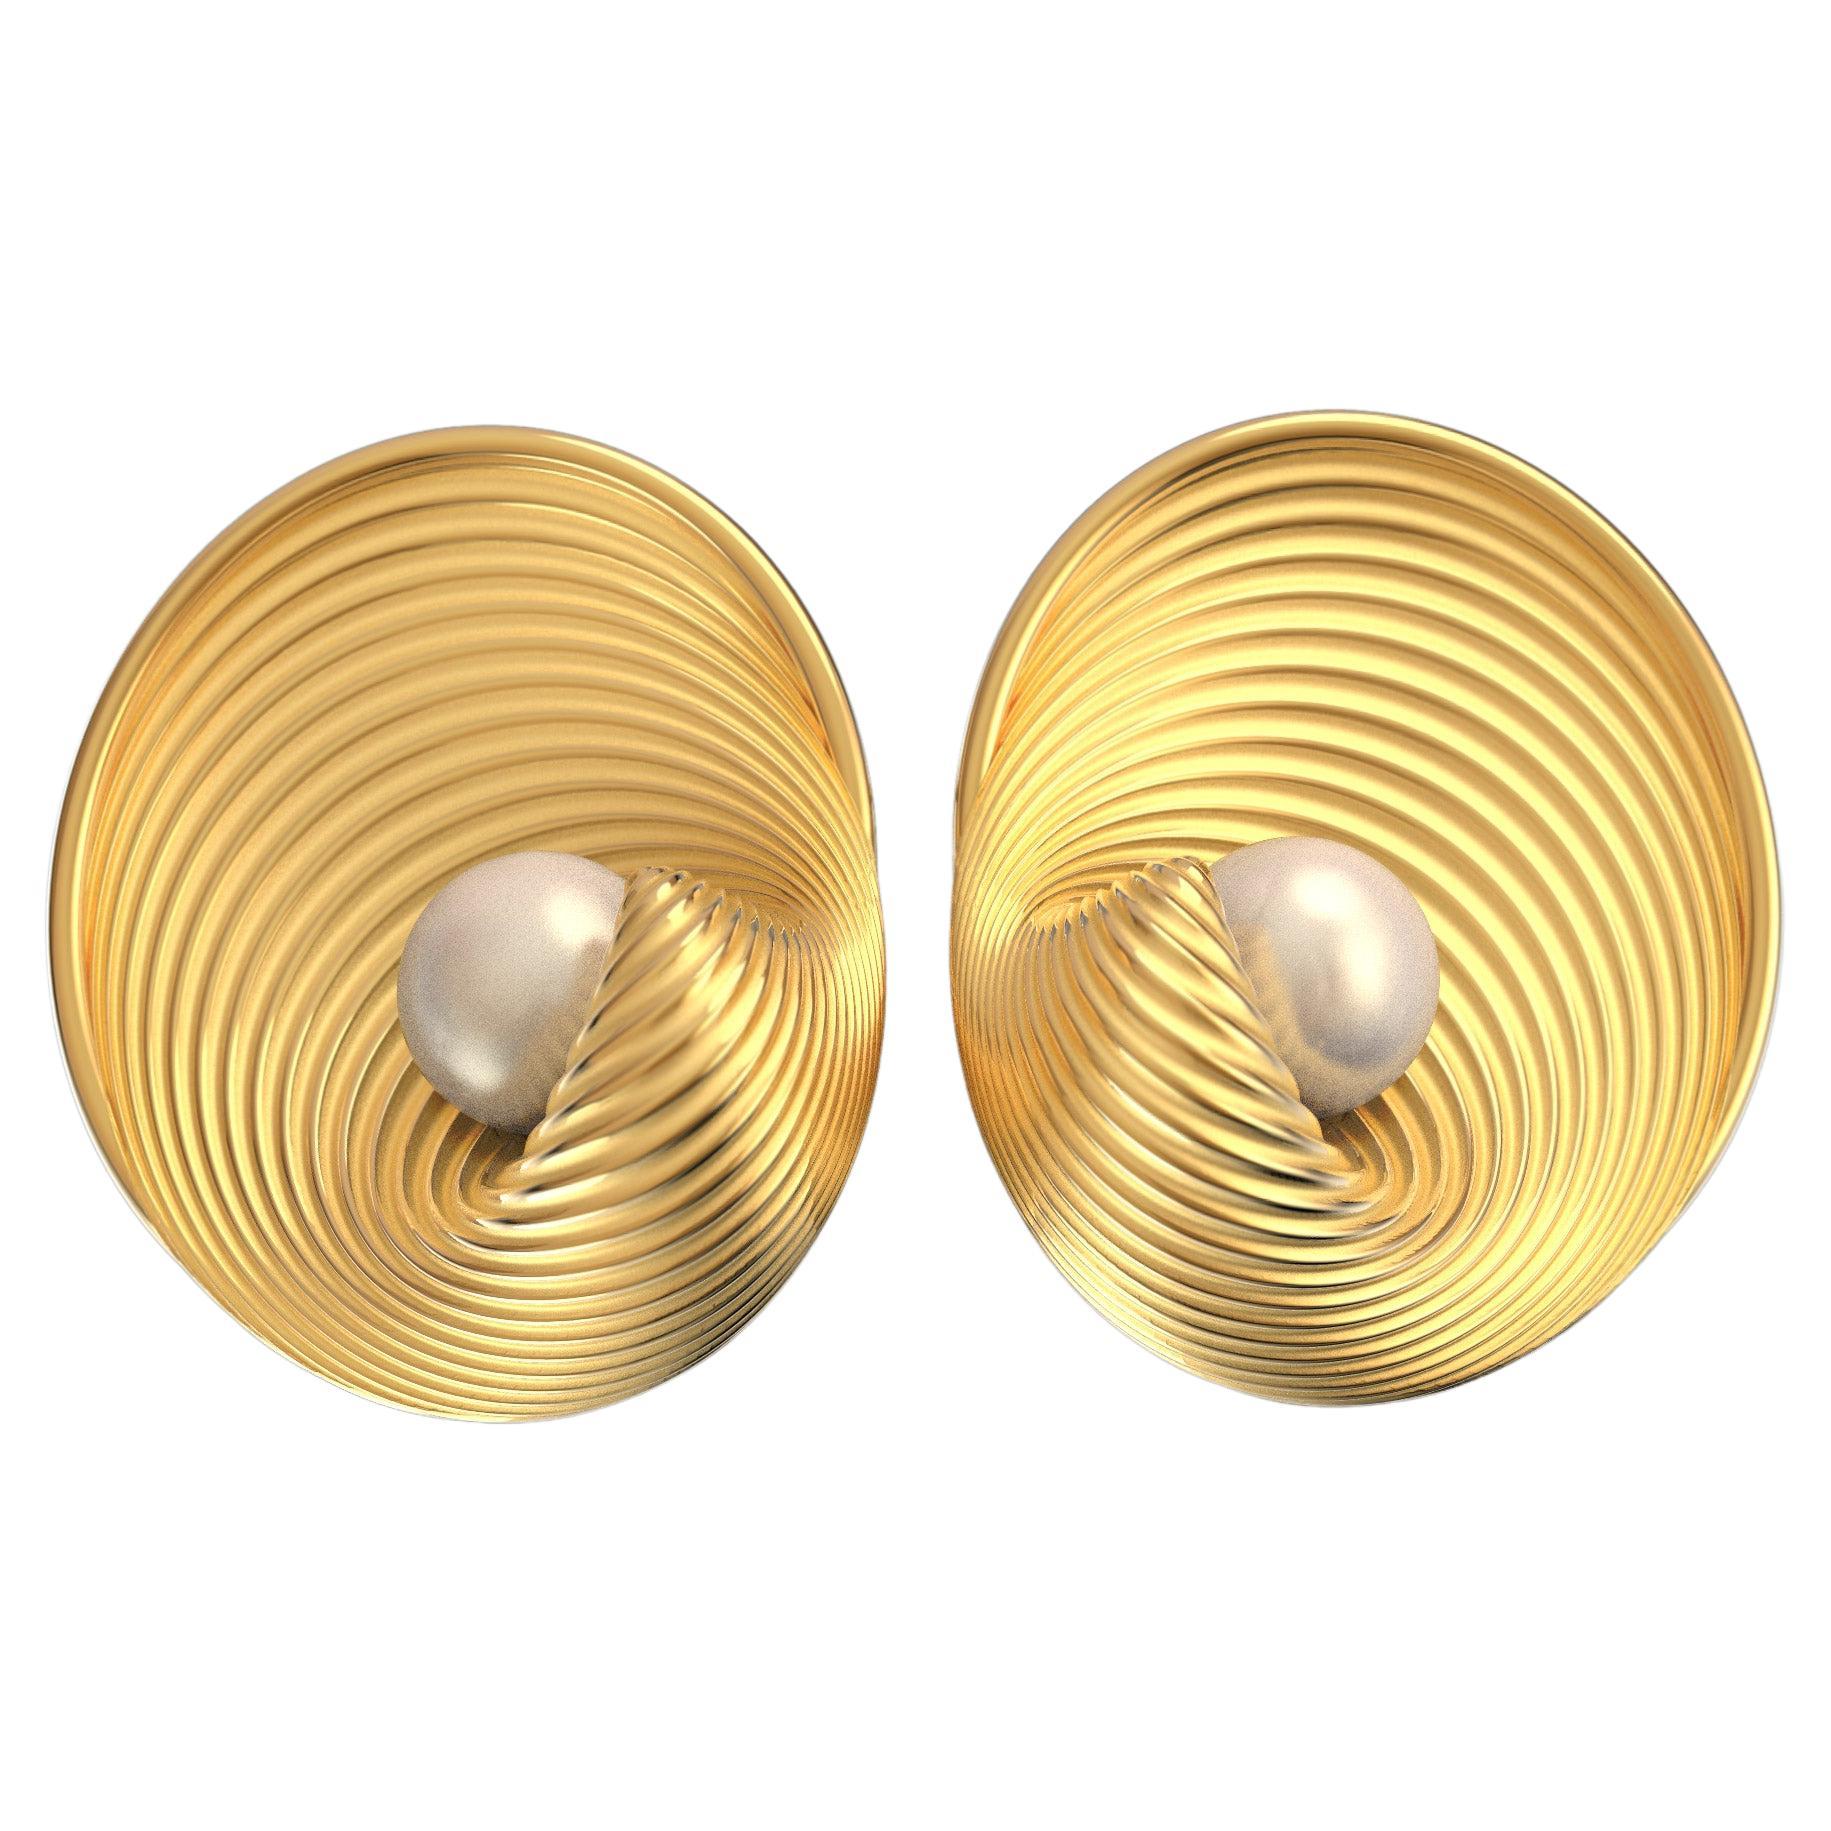 Akoya sea pearl earrings in genuine 18k solid gold made in Italy, white pearl earrings. Italian fine jewelry, modern gold earrings, 25 mm long stunning earrings with natural Akoya sea pearls, crafted in polished and raw solid gold 18k 
Earring Size: